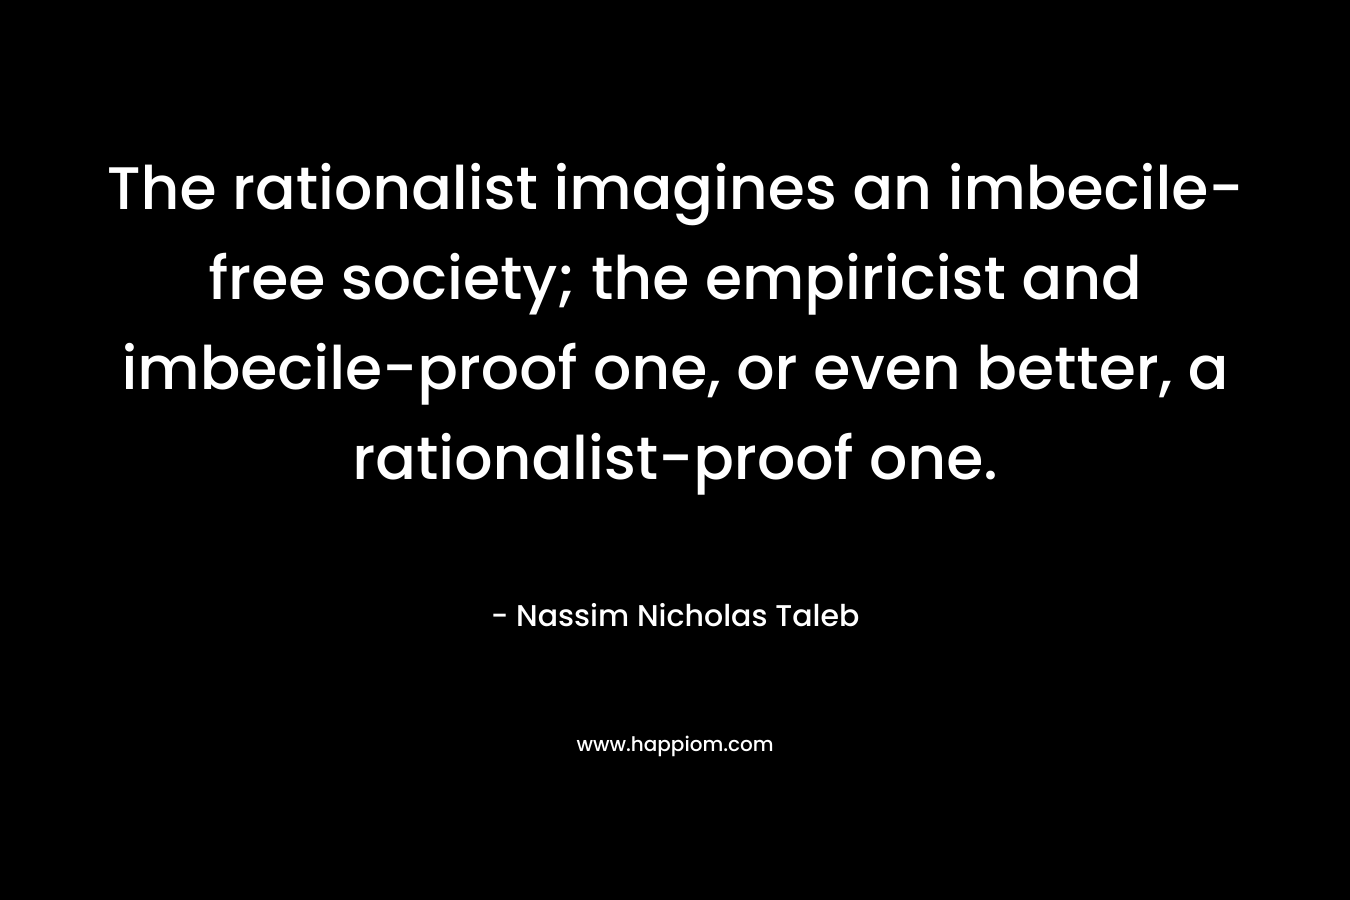 The rationalist imagines an imbecile-free society; the empiricist and imbecile-proof one, or even better, a rationalist-proof one.